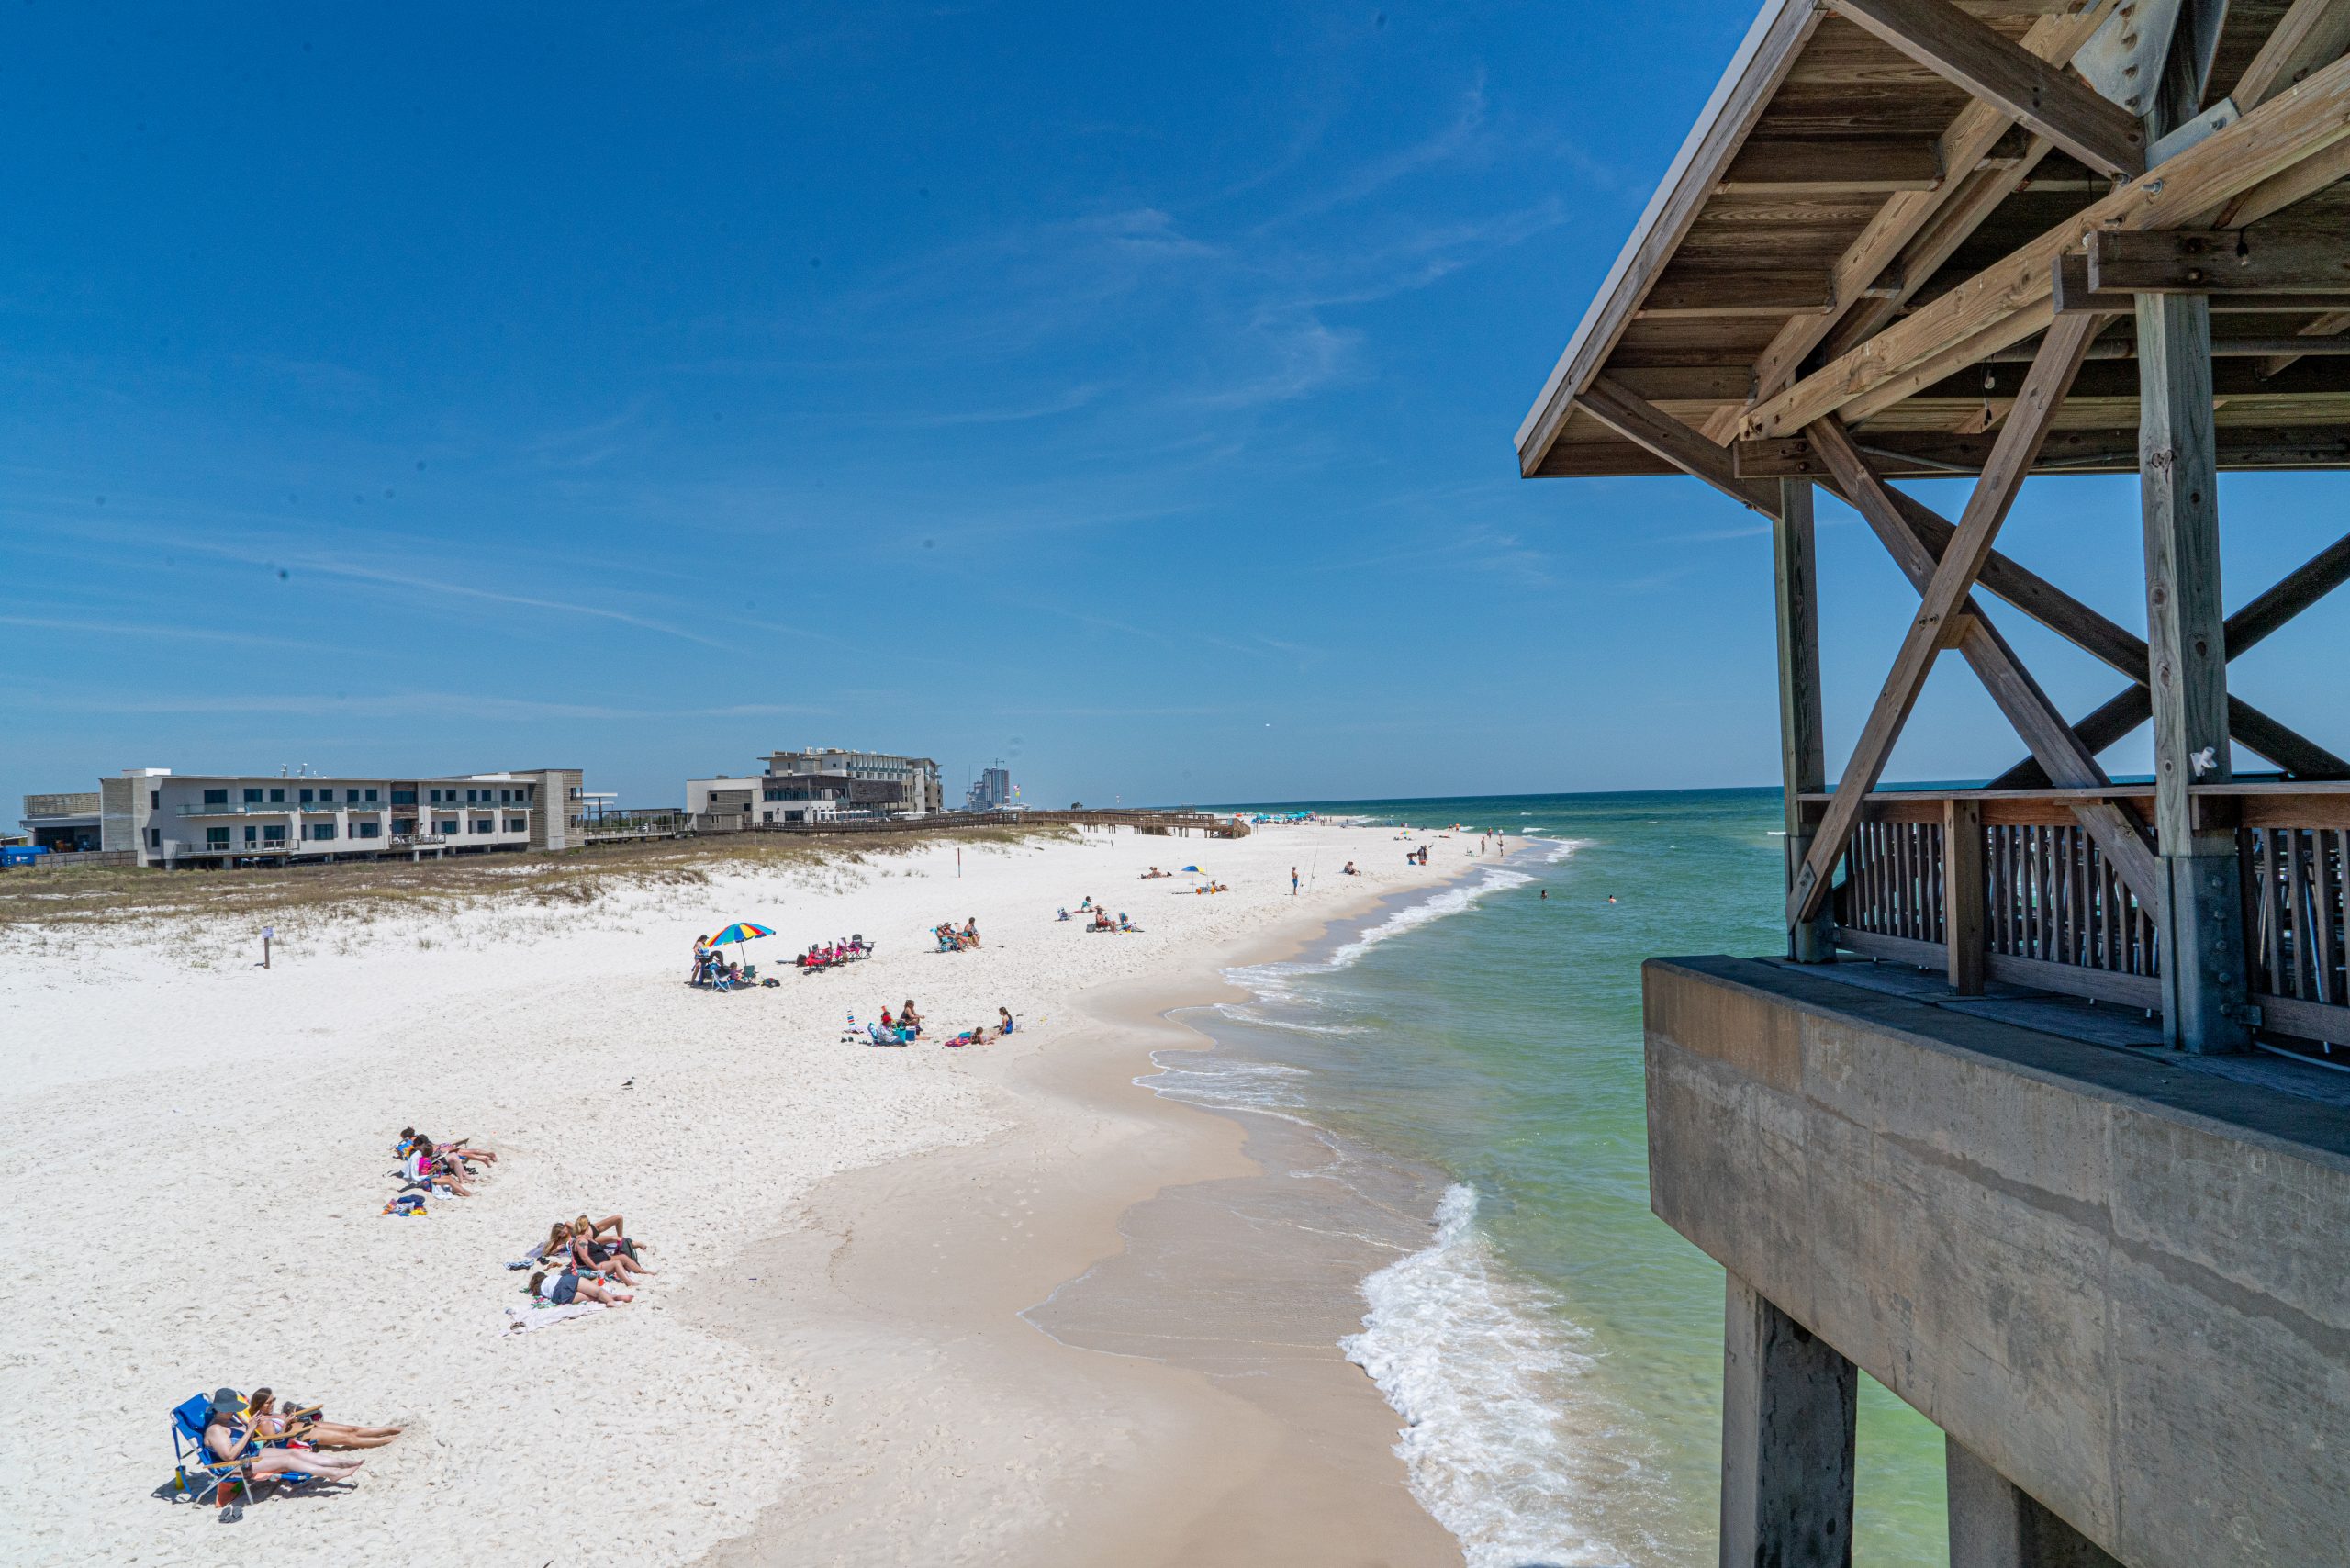 17 Tips and Tricks for the Best Orange Beach / Gulf Shores Vacation Ever